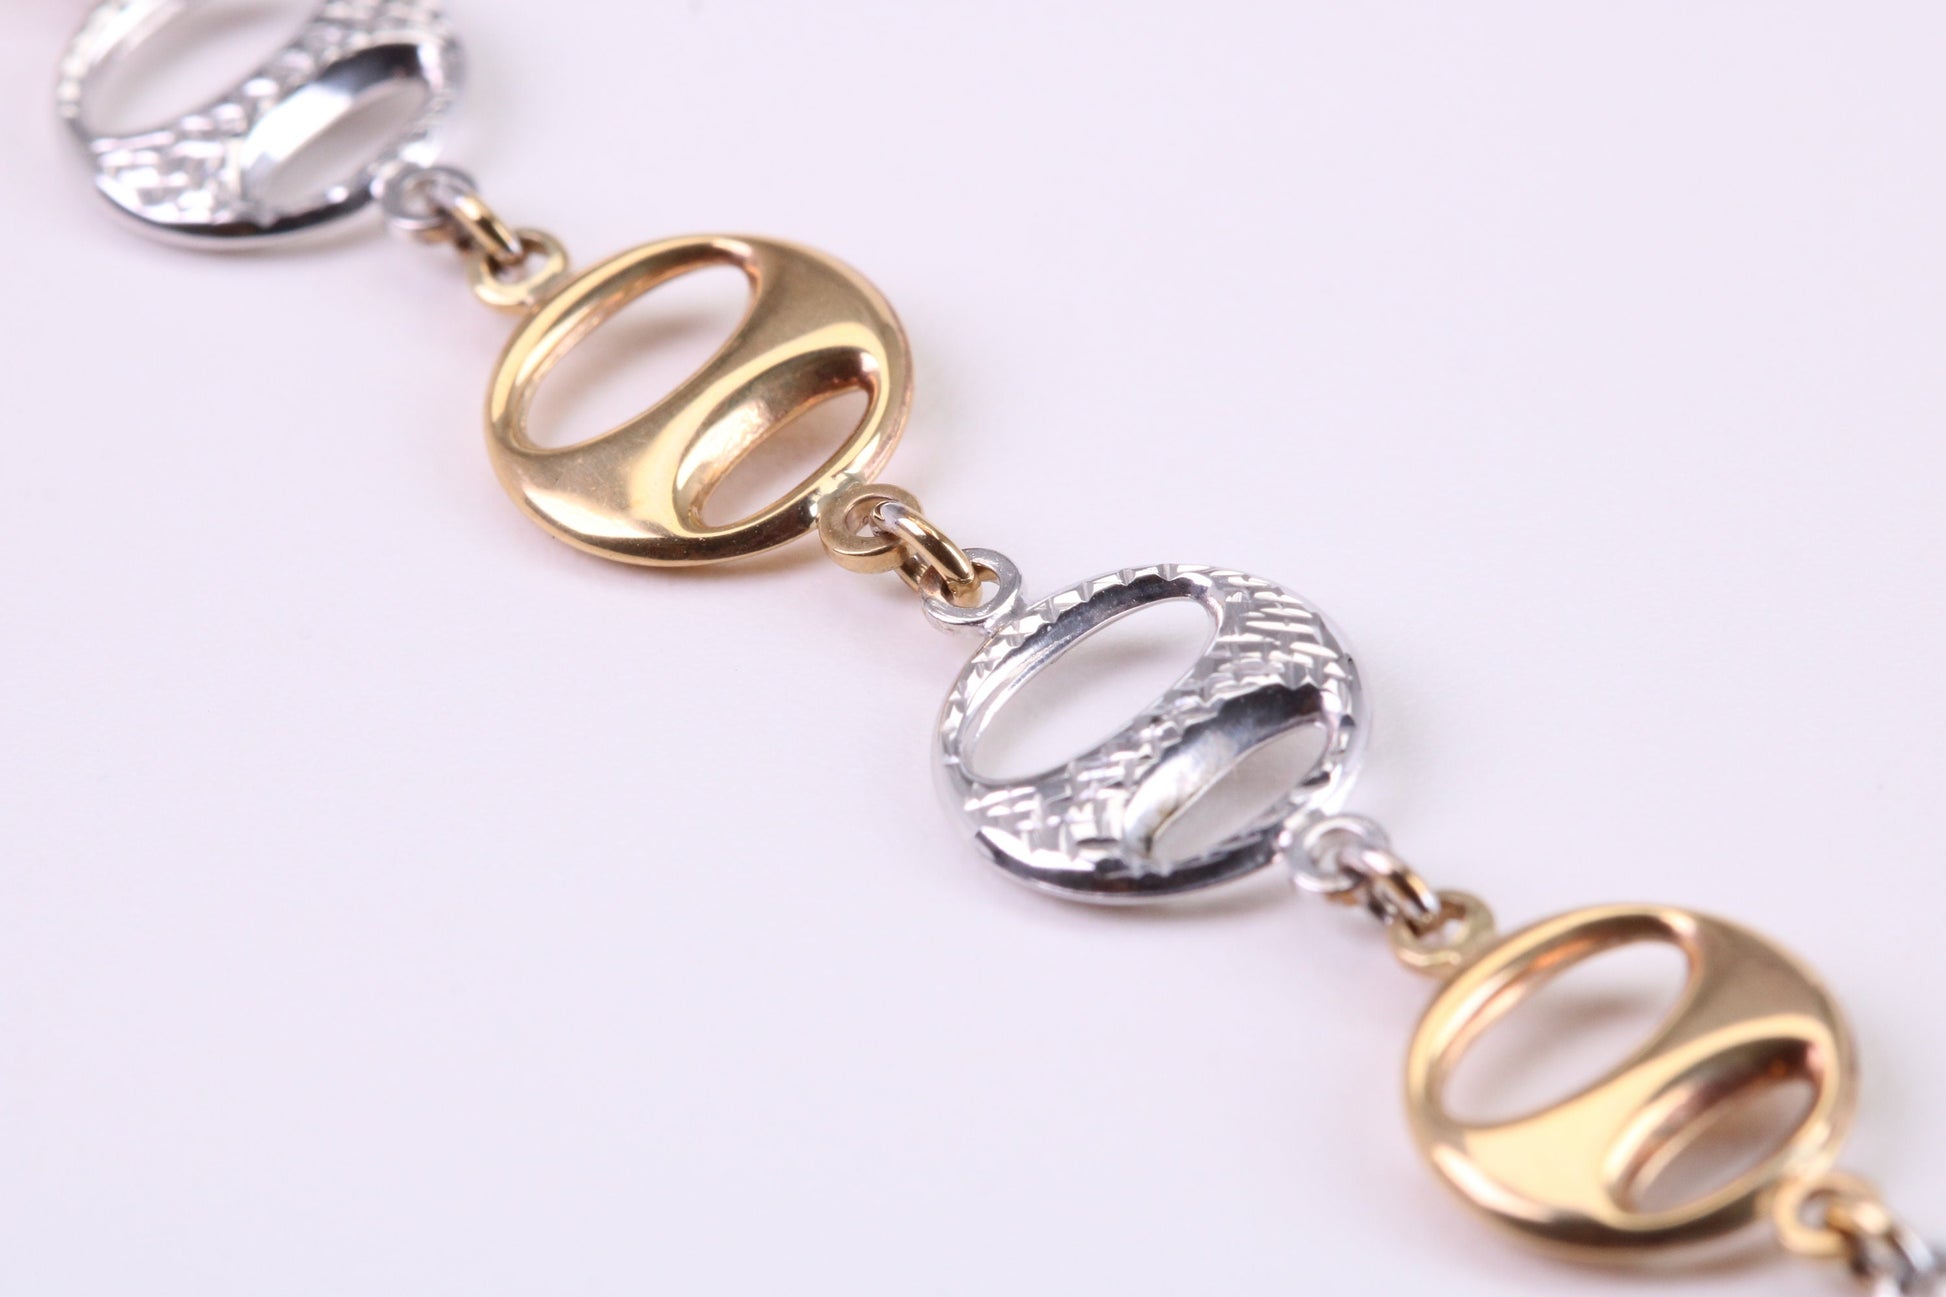 Round Patterned Link Bracelet, Made From Solid Yellow and White Gold, British Hallmarked, Luxury Gift Boxed